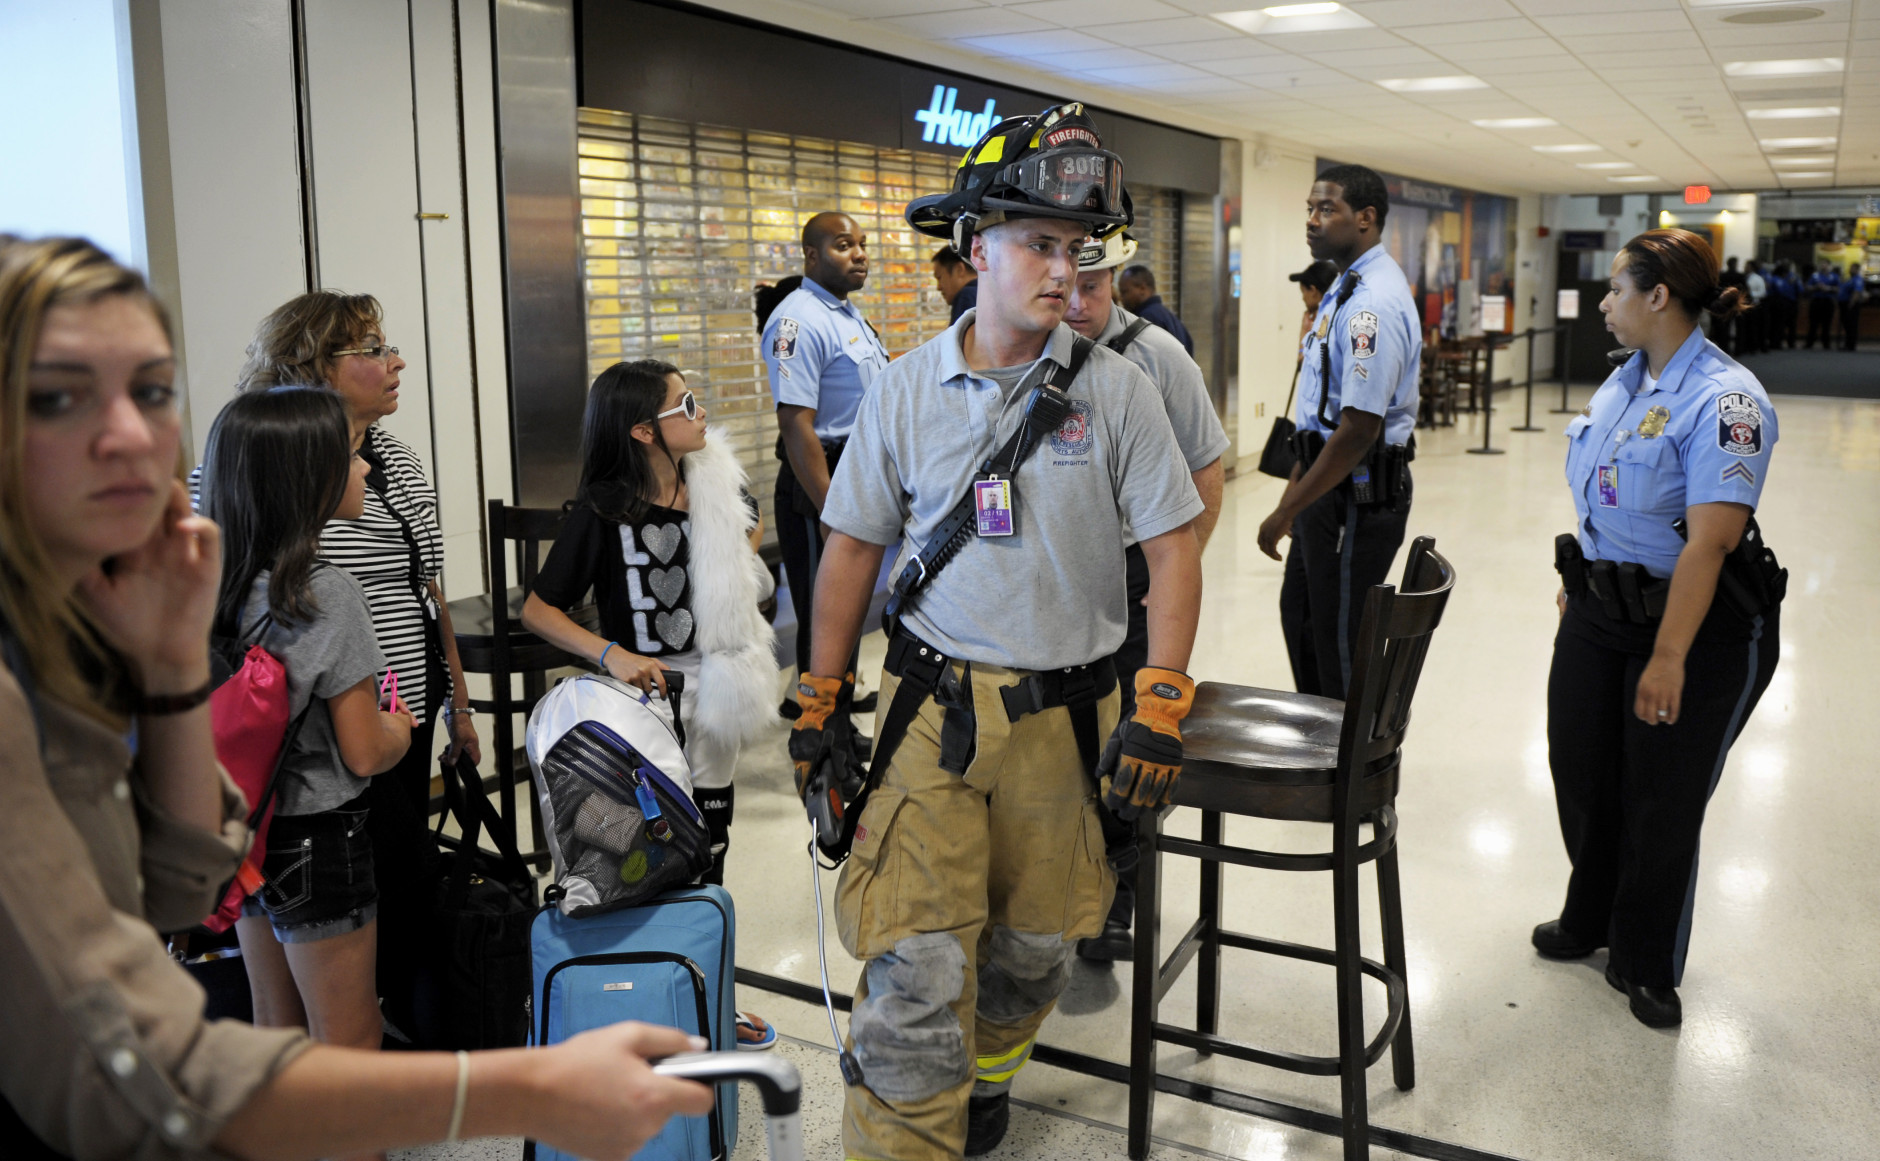 Ronald Reagan National Airport Police stop travelers from entering Terminal A, Tuesday, Aug. 23, 2011, as the airport's fire department checks for damage after an earthquake in the Washington area. A 5.9 magnitude earthquake centered in Virginia forced evacuations of all the monuments on the National Mall in Washington and rattled nerves from Georgia to Martha's Vineyard, the Massachusetts island where President Barack Obama is vacationing. No injuries were immediately reported.  (AP Photo/Cliff Owen)